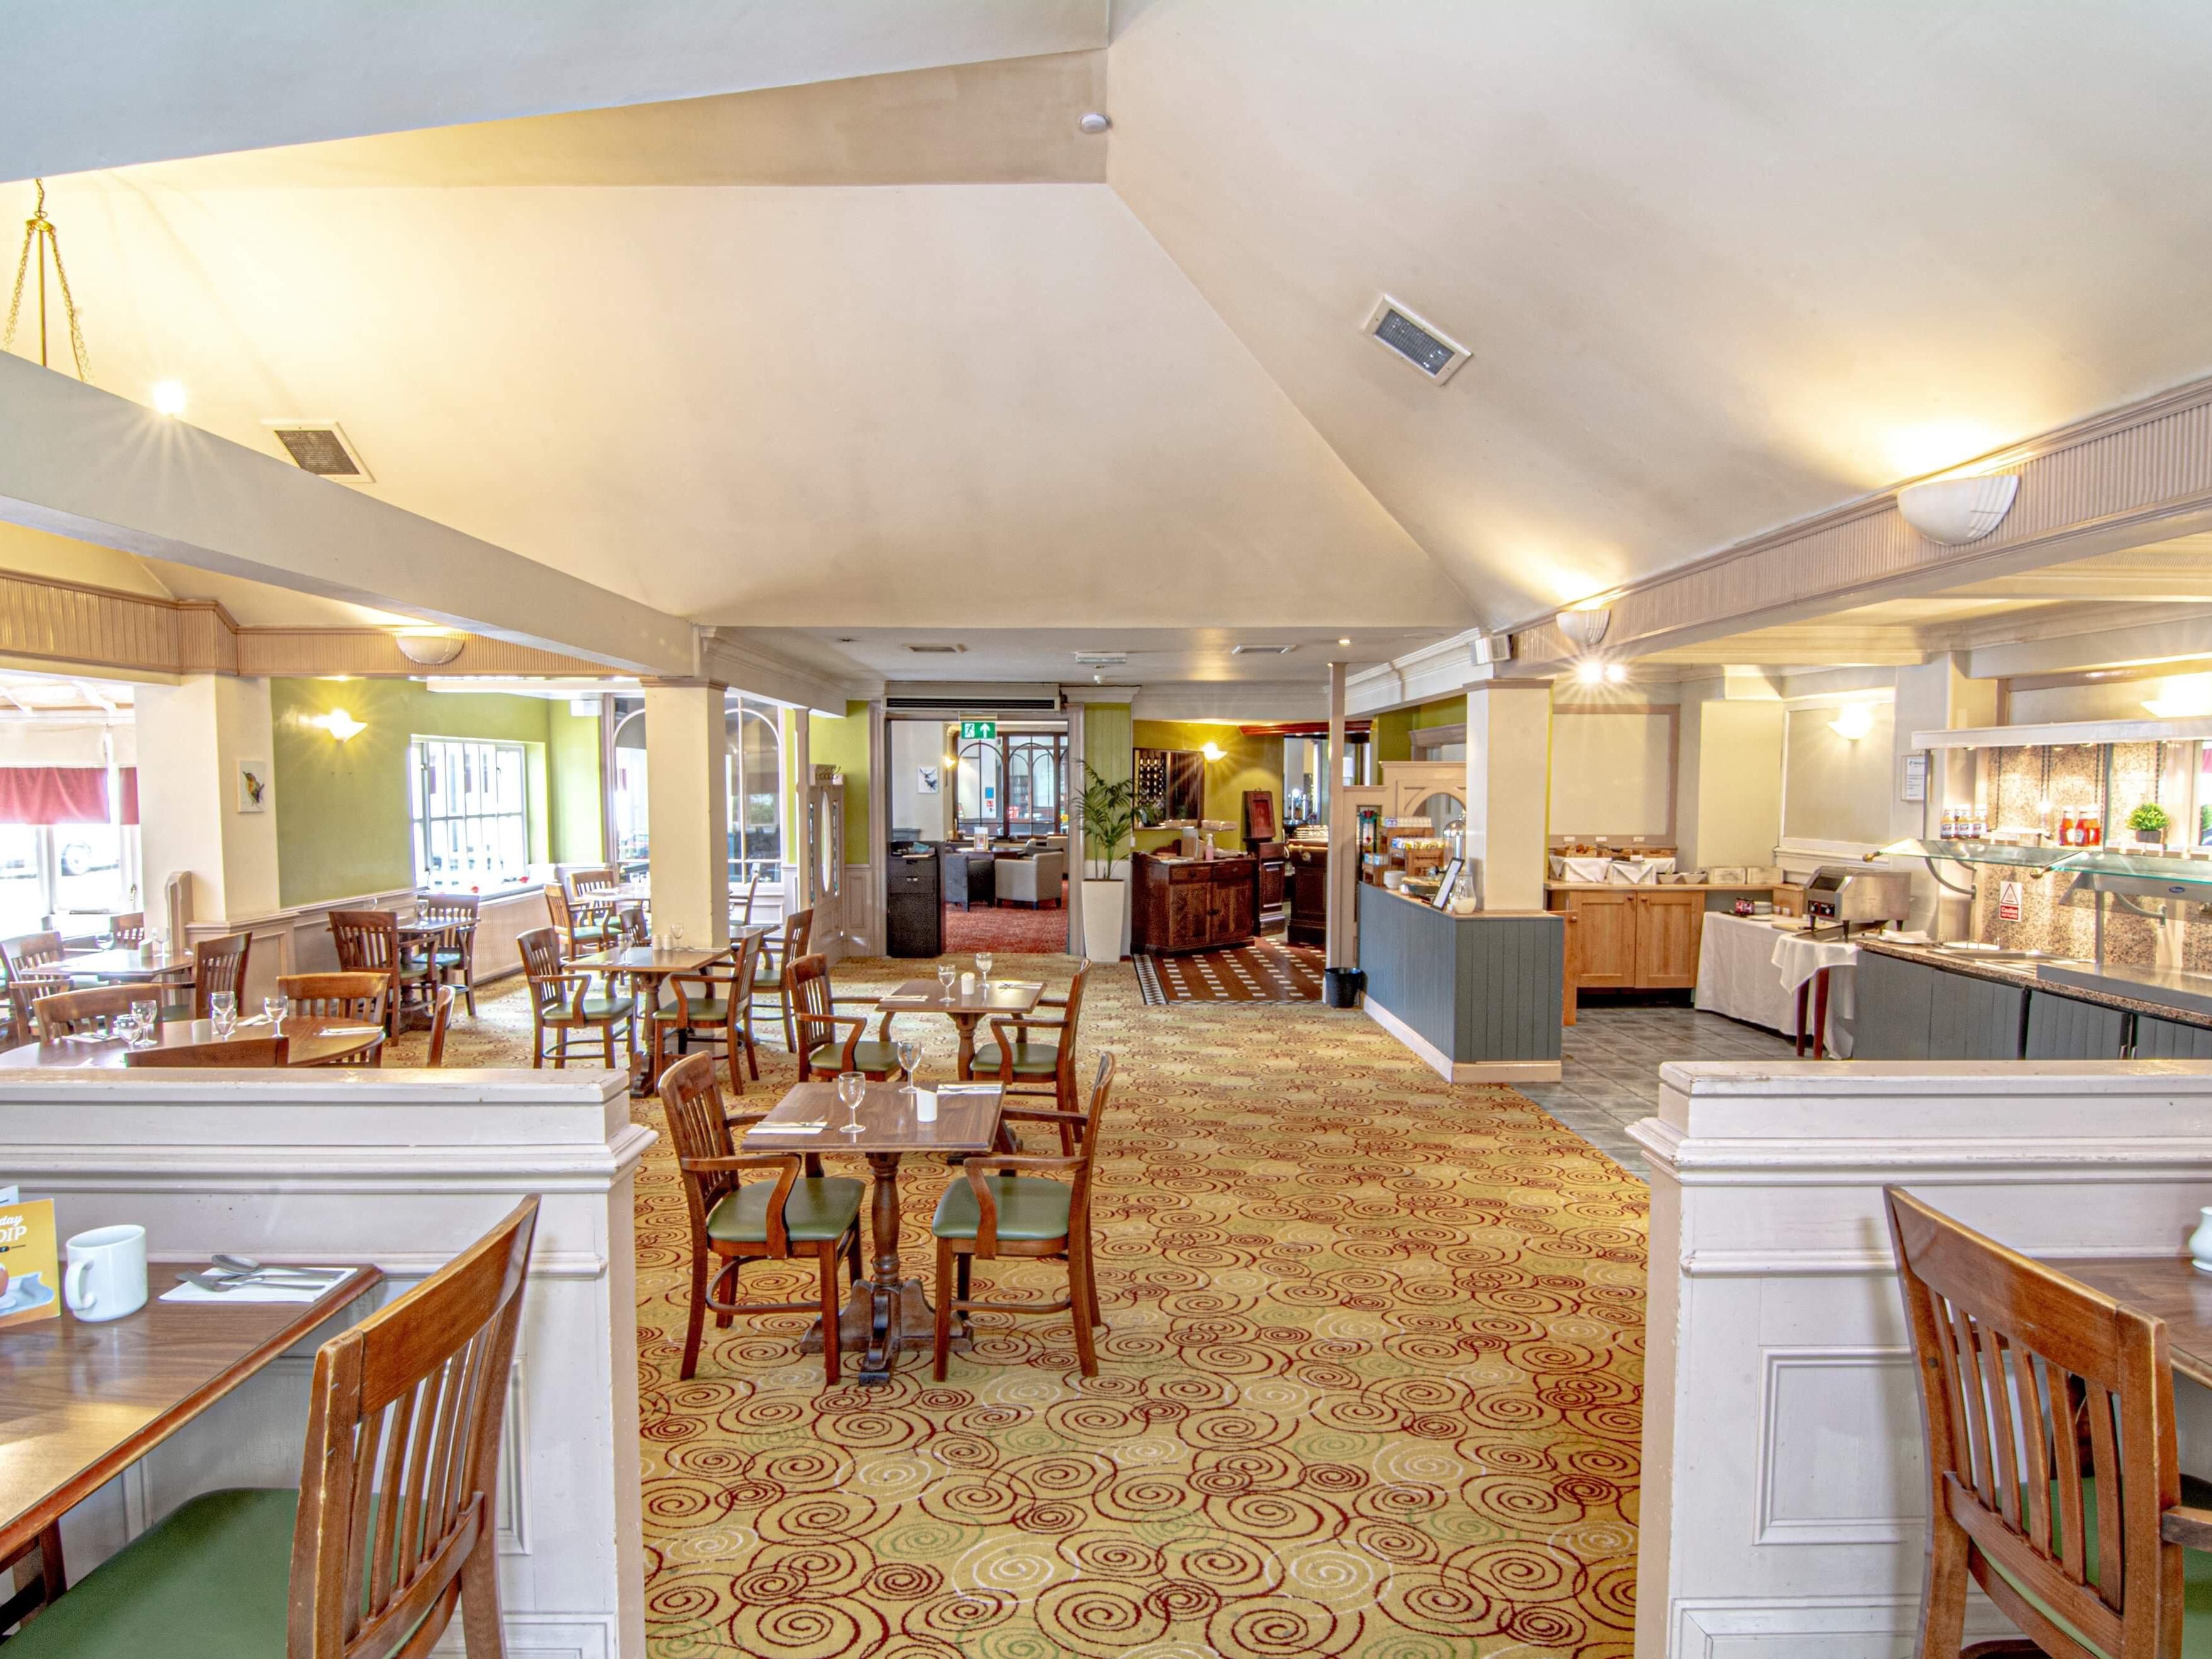 With several tasty options for food and drink at Holiday Inn Ipswich - Orwell, there’s something for every taste and occasion. Our Priory Restaurant offers contemporary British dishes and a light bites menu in the Priory Bar. We also have ample outdoor seating so you can enjoy a spot of al fresco dining on warmer days.